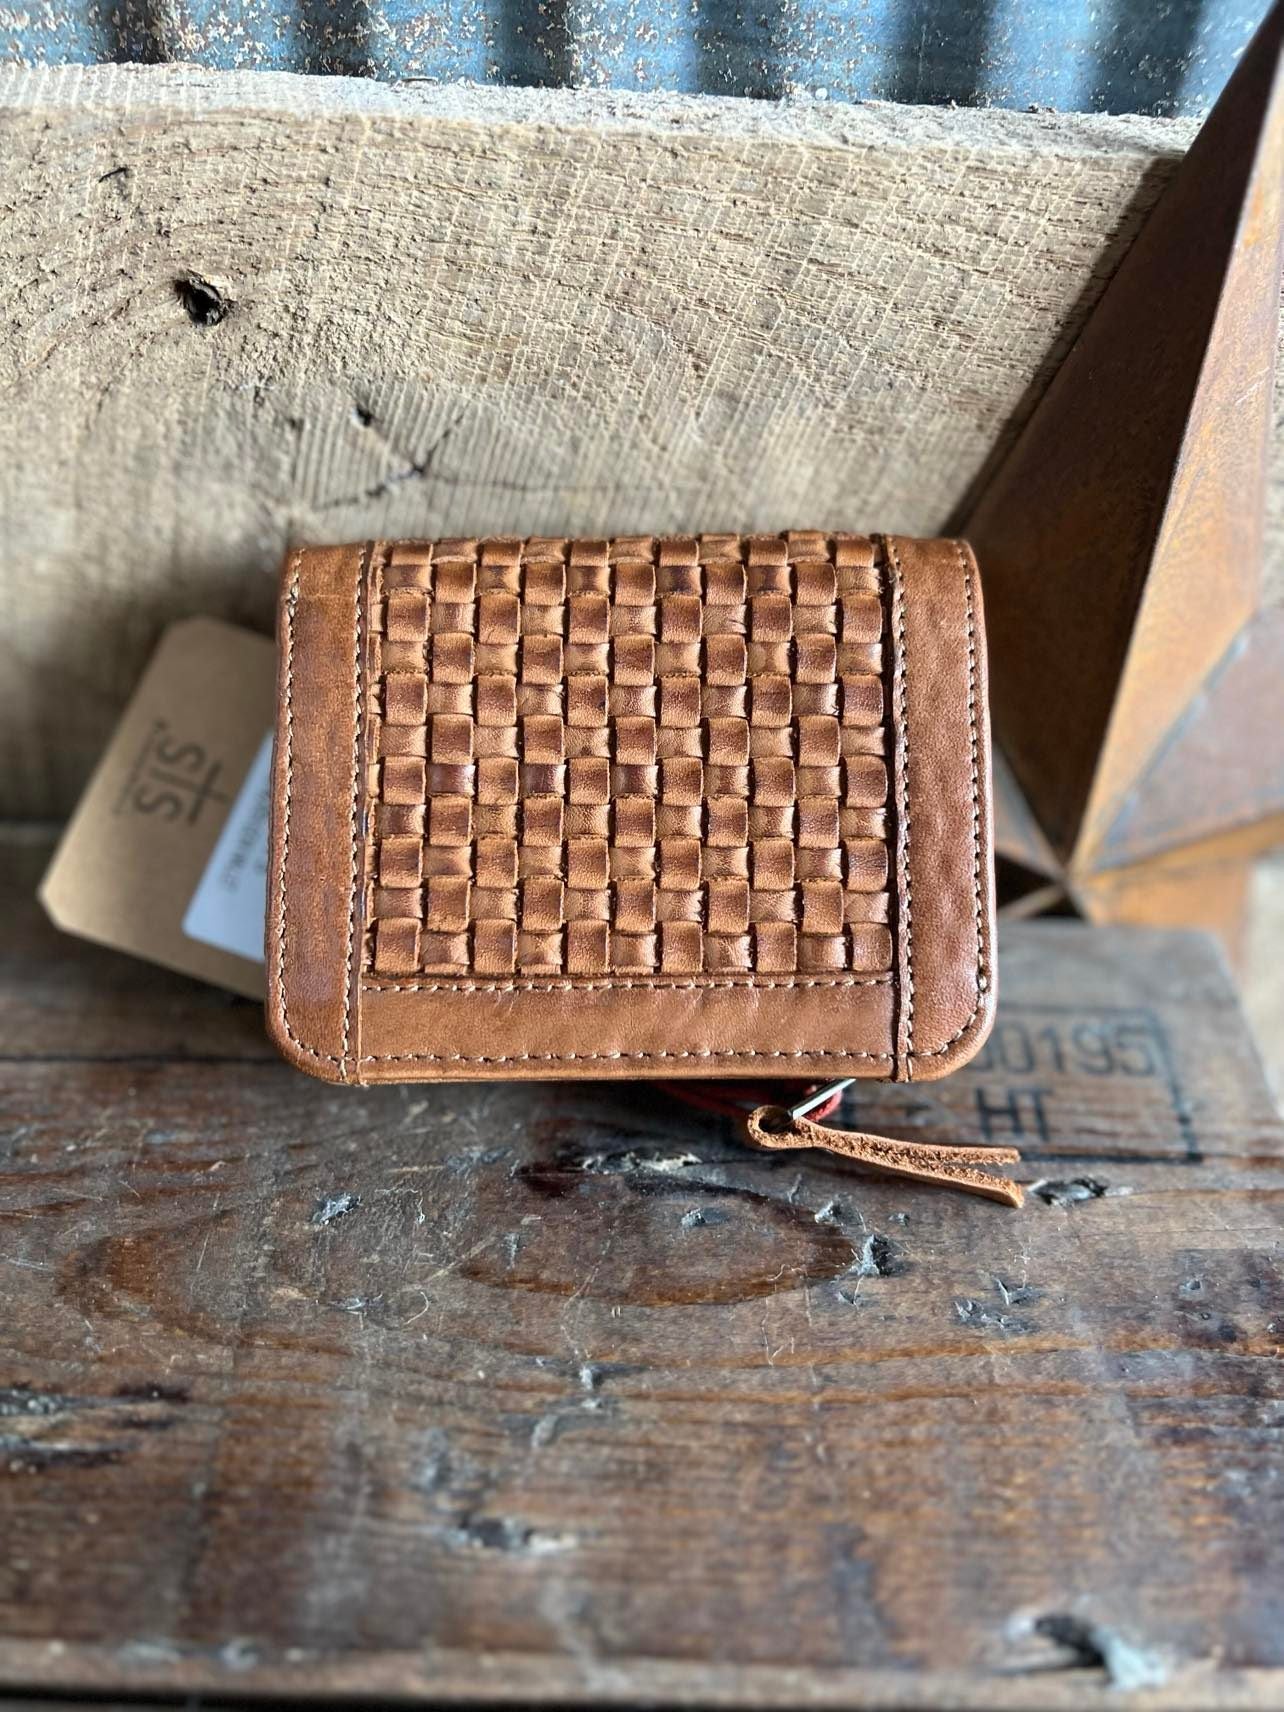 Sts Sweet Grass Soni Wallet-Wallets-Carrol STS Ranchwear-Lucky J Boots & More, Women's, Men's, & Kids Western Store Located in Carthage, MO